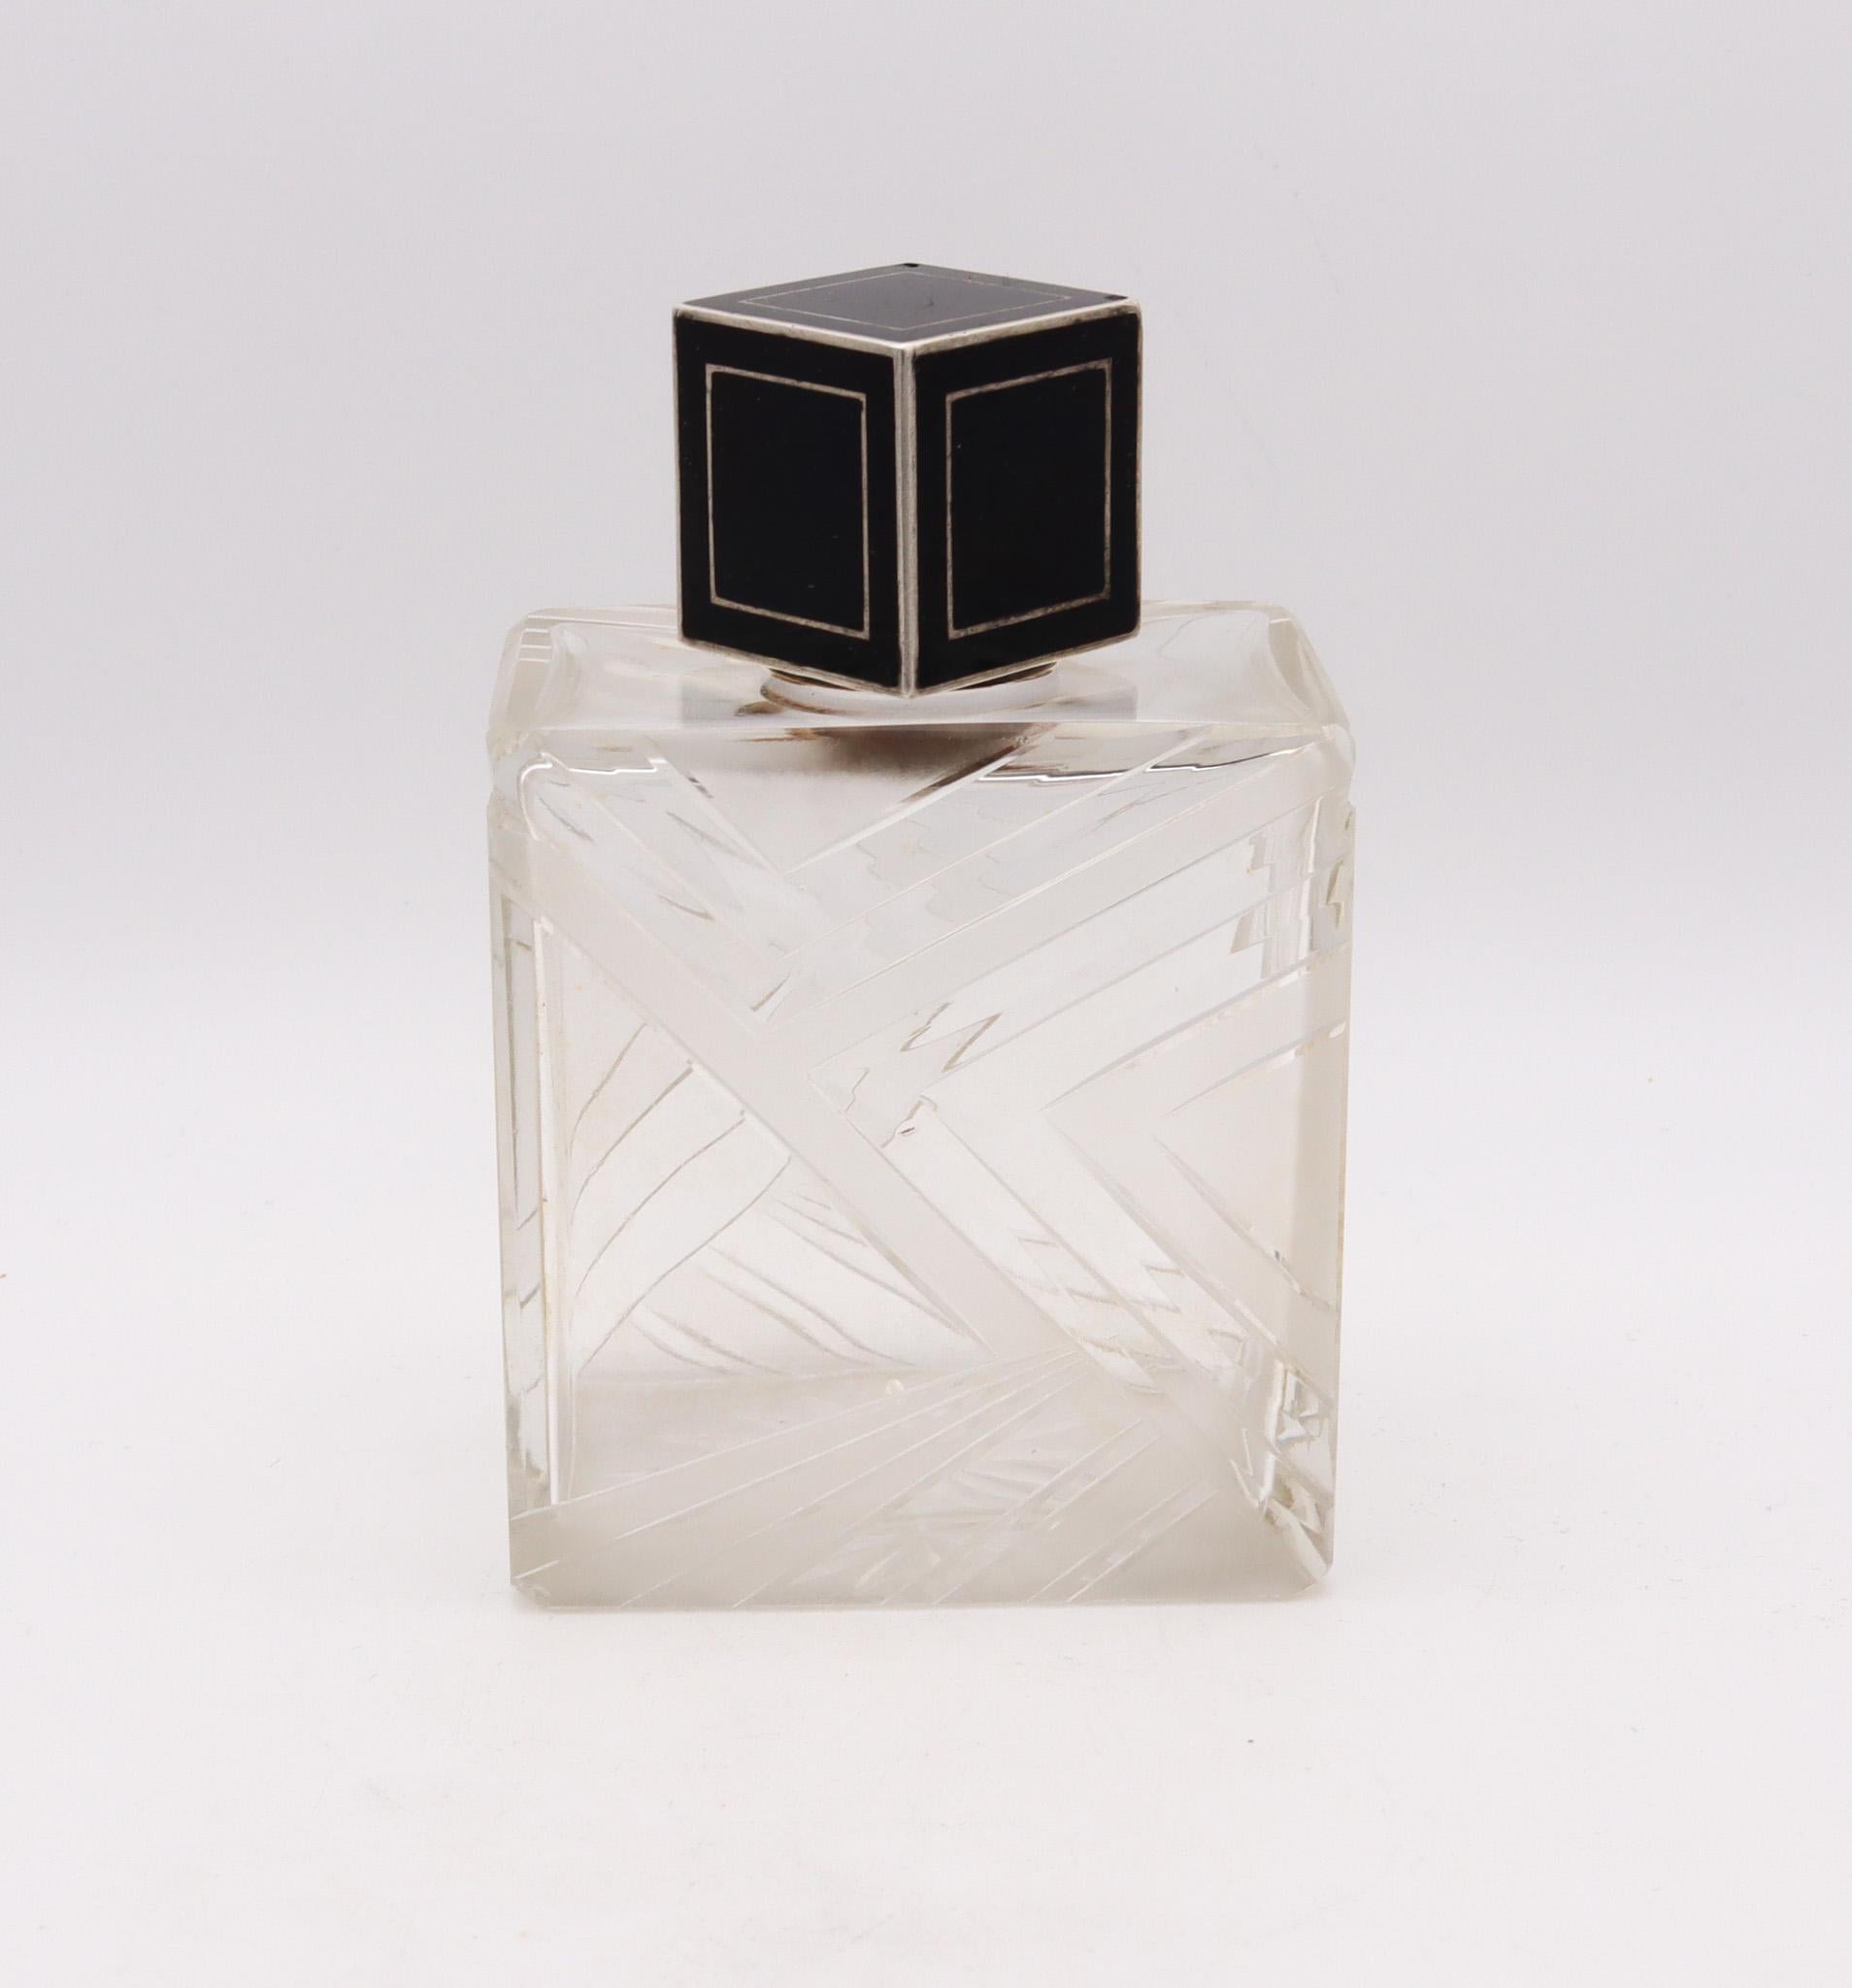 French art deco perfume bottle designed by Victor Leneuf (1885-1935).

Beautiful perfume flask bottle, created in Paris France during the art deco period, back in the 1925. Crafted at the workshop of Victor Leneuf, with very elegant geometric zig